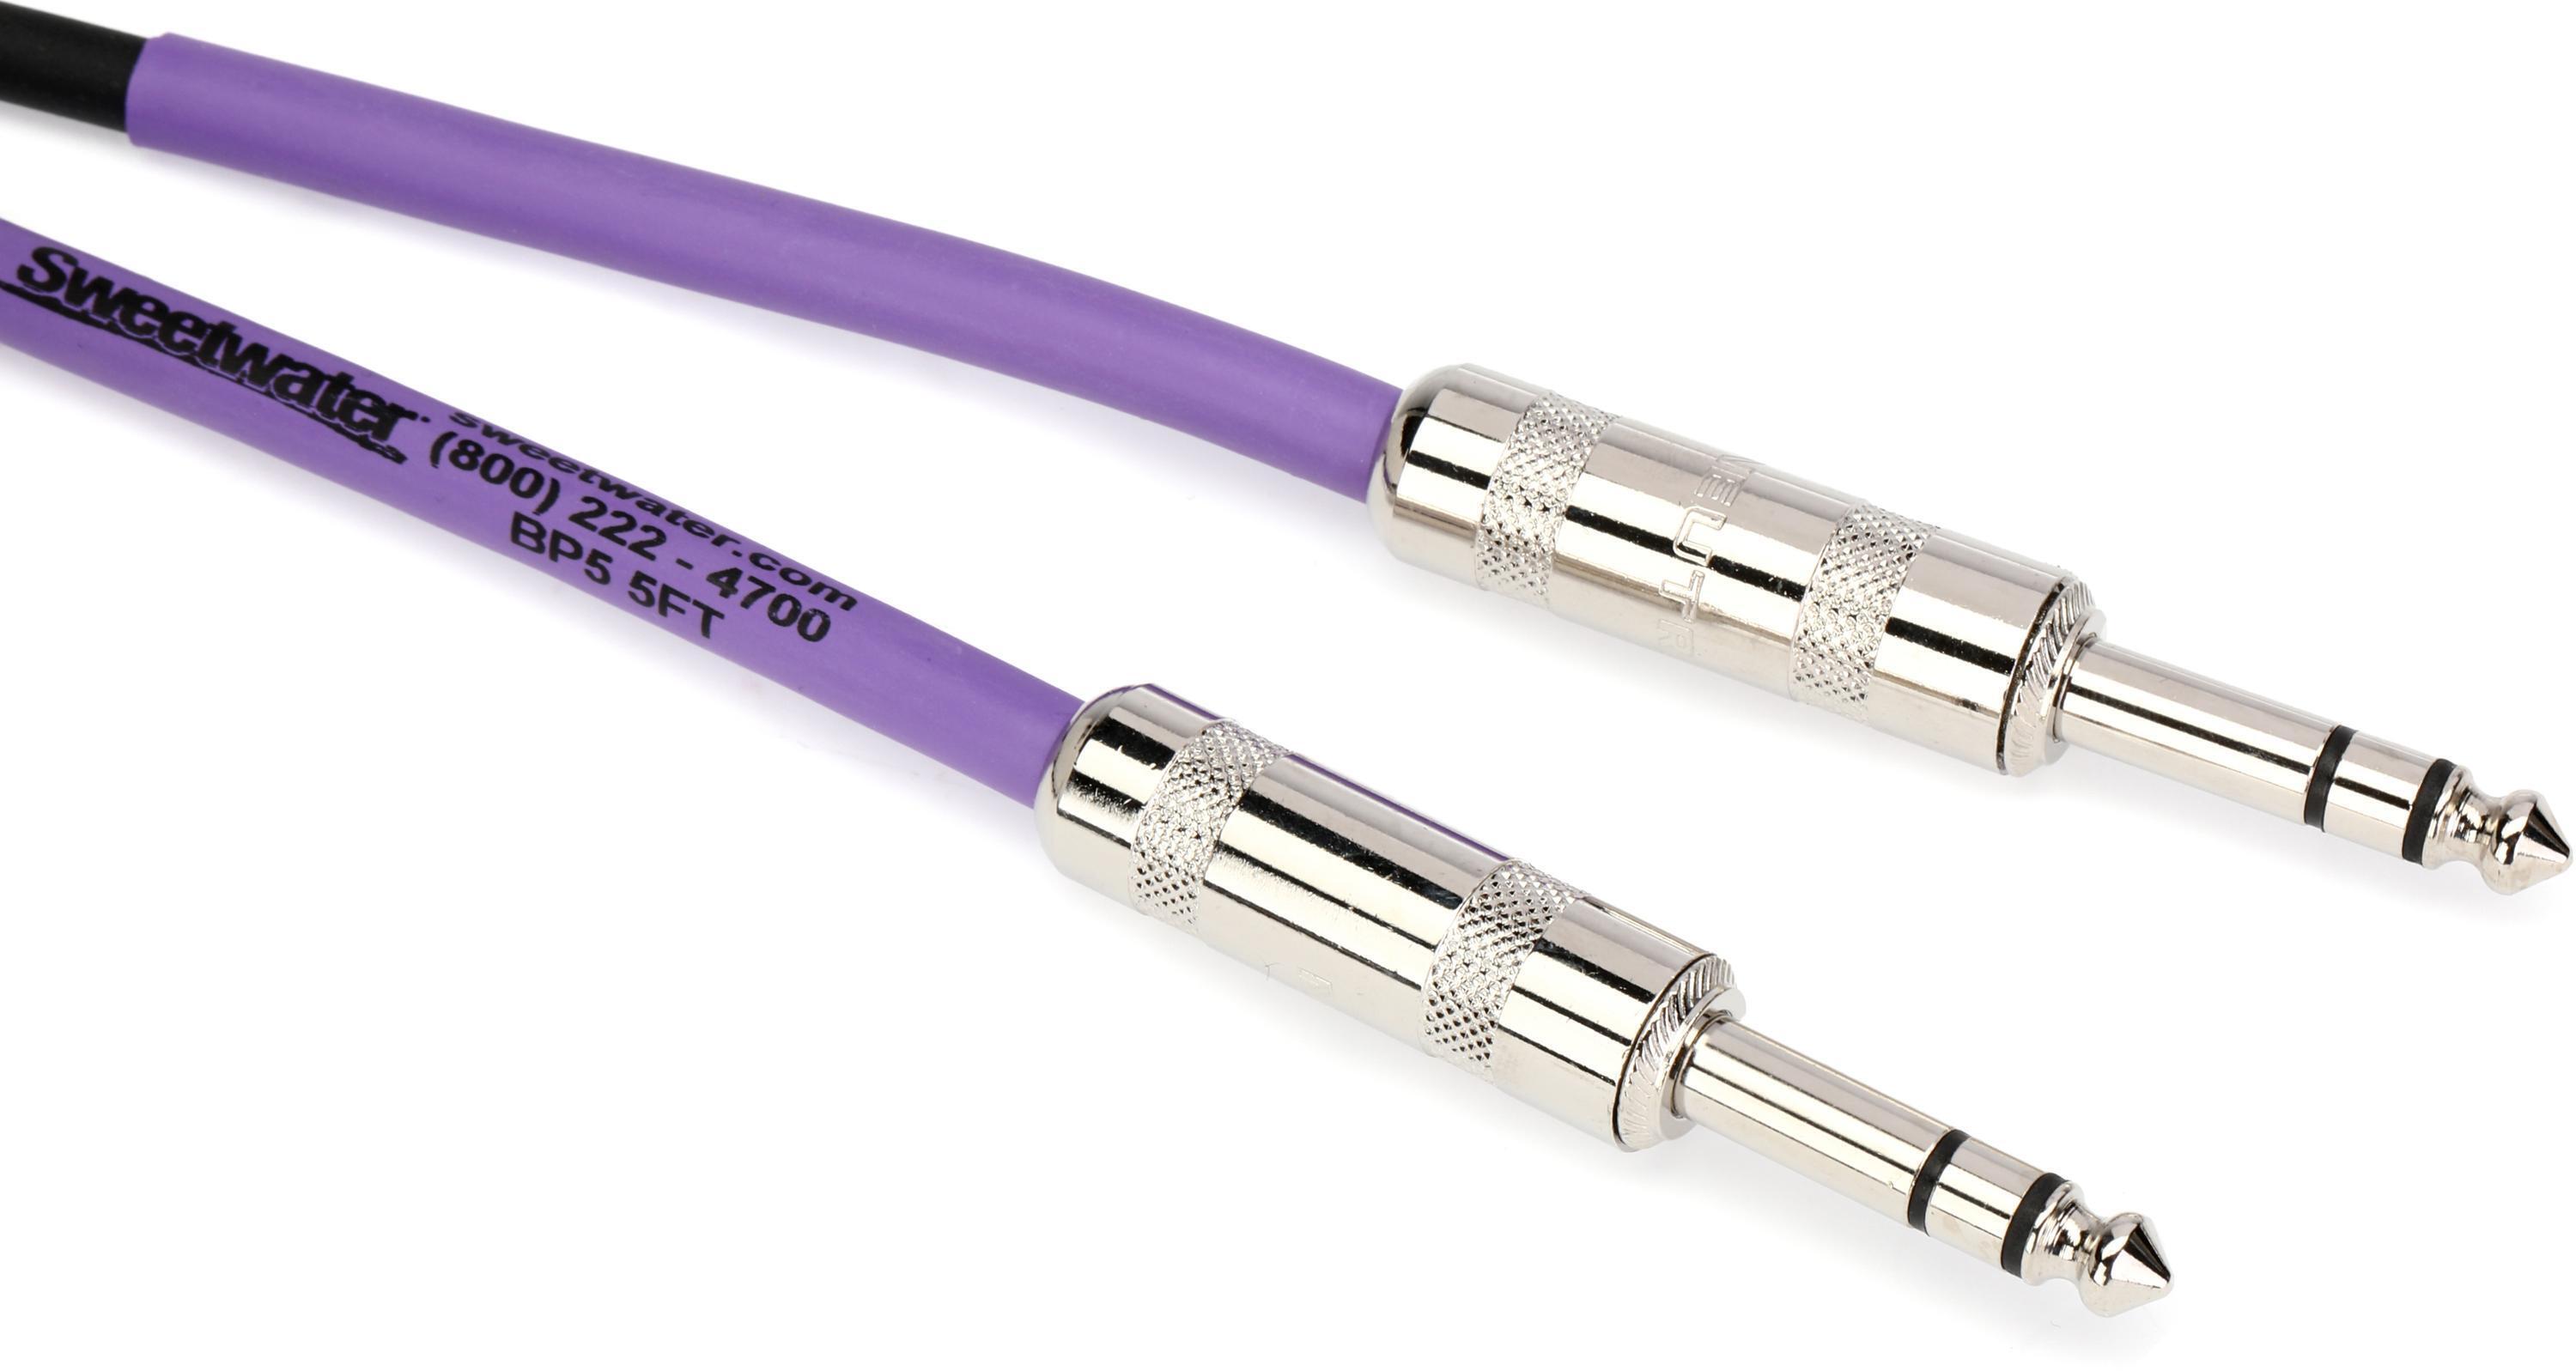 Bundled Item: Pro Co BP-5 Excellines Balanced Patch Cable - 1/4-inch TRS Male to 1/4-inch TRS Male - 5 foot